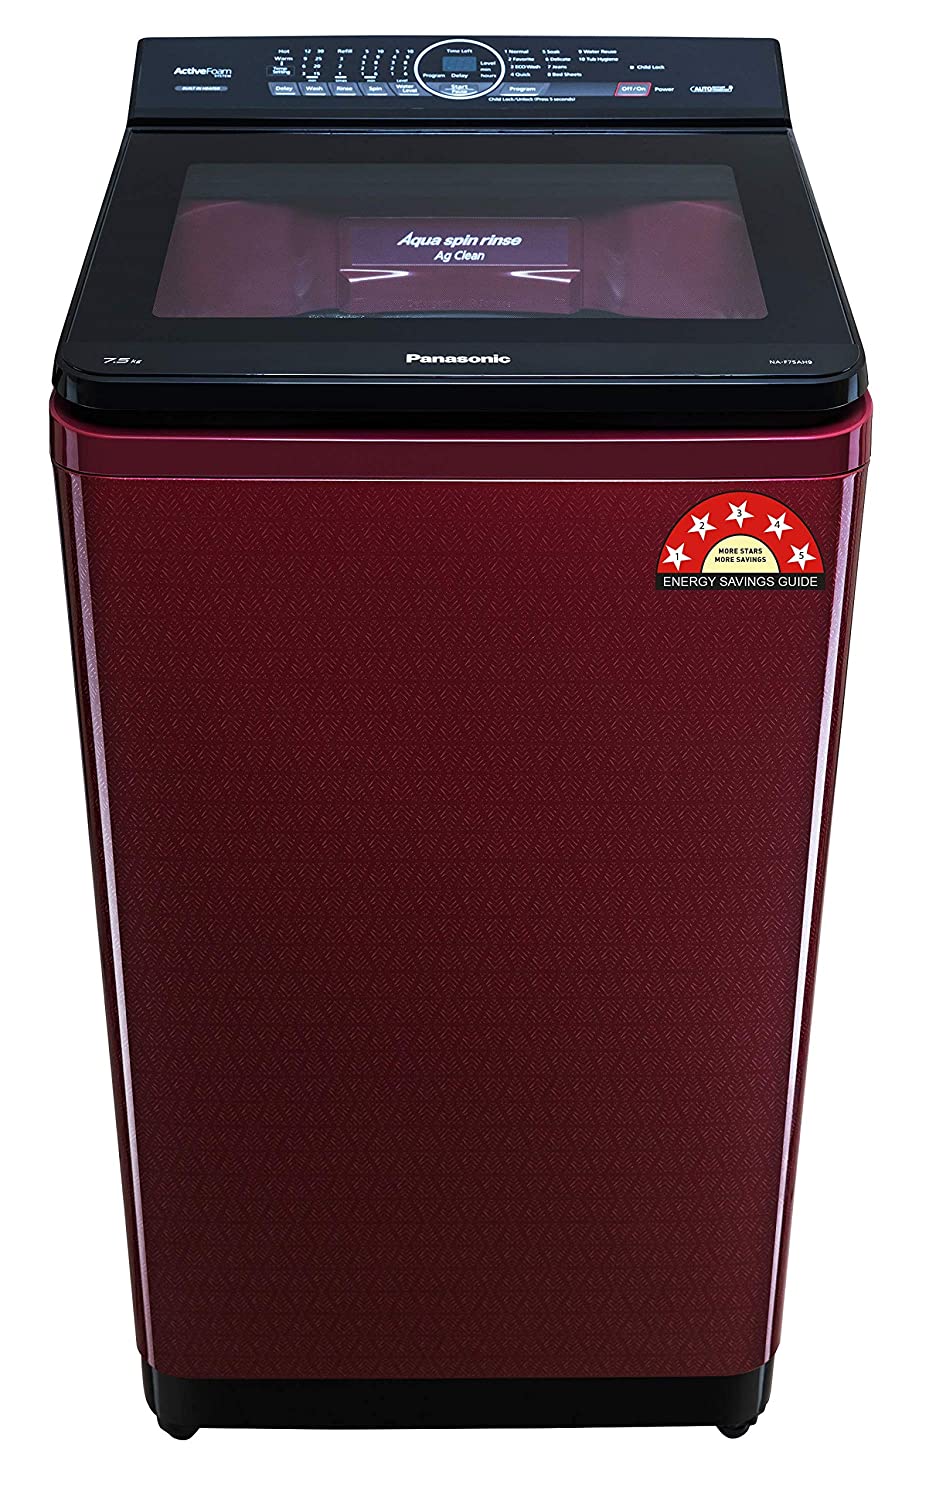 Panasonic 7.5 Kg 5 Star Built-in Heater Fully-automatic Top Loading Washing Machine Na-f75ah9rrb